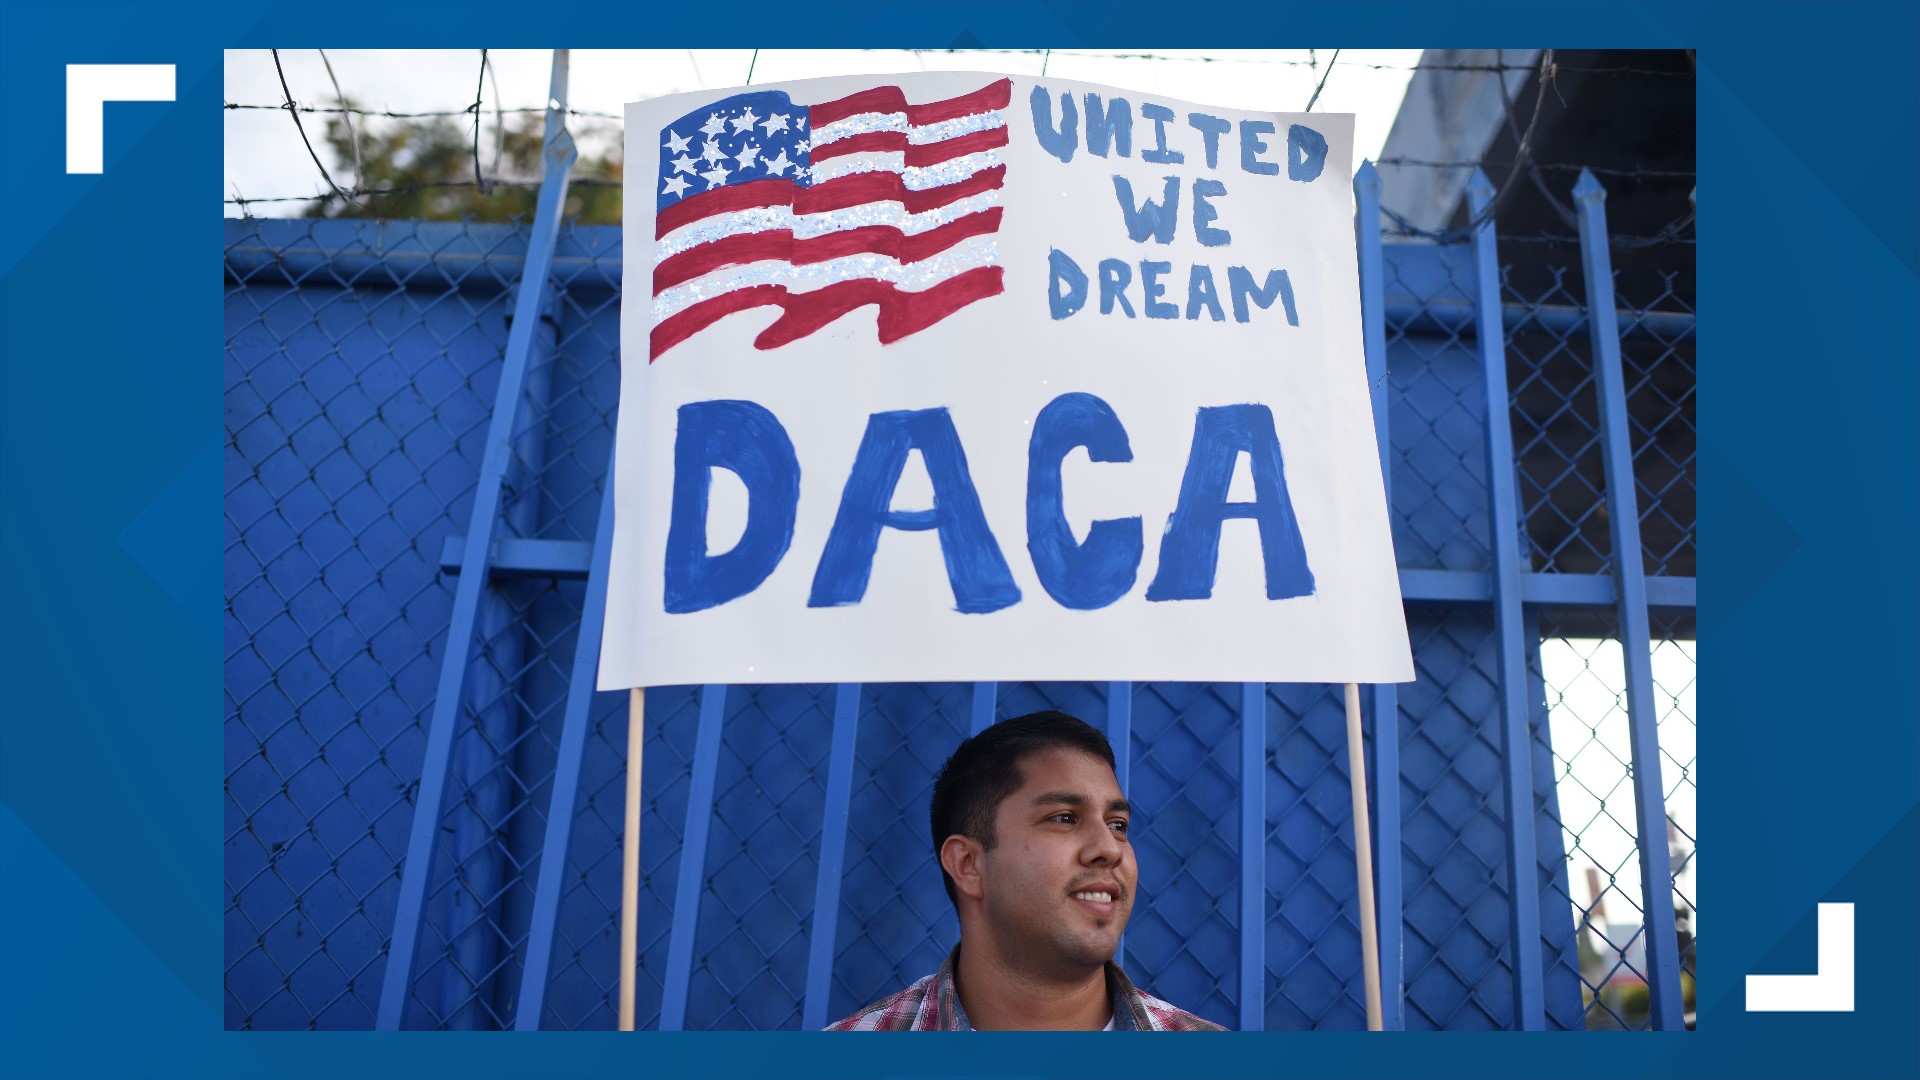 The Biden Administration announced a proposed rule on Sept. 27 that would help reinstate the 2012 DACA policy.